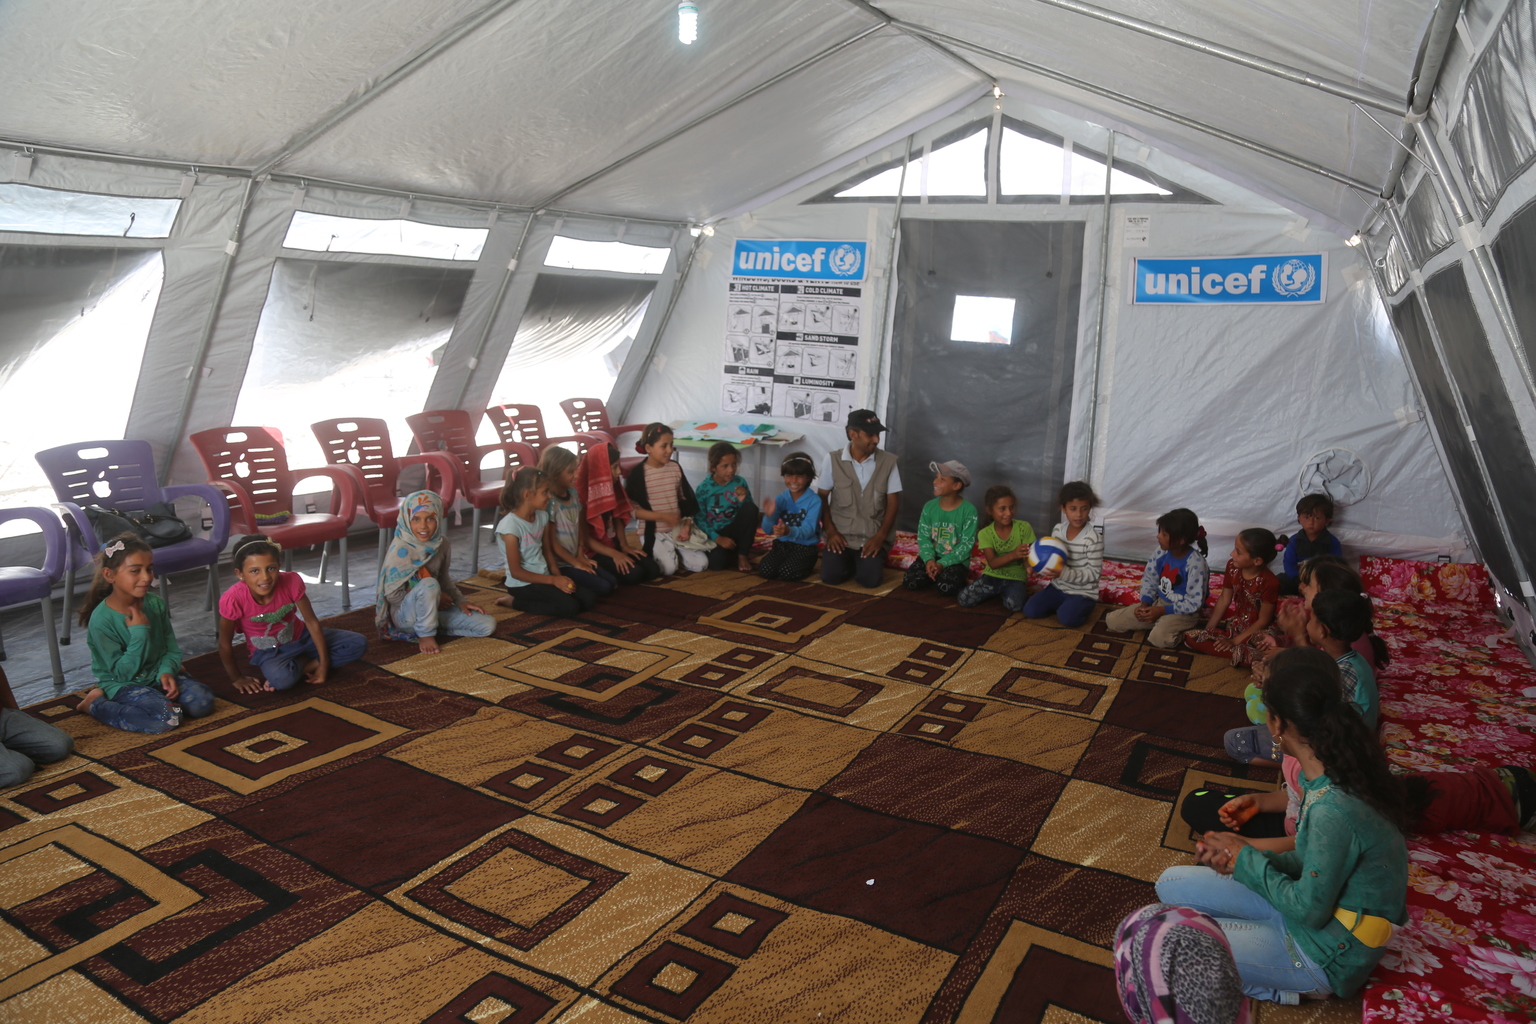 On 4 July 2017 in Ain Issa camp in the Syrian Arab Republic, displaced children from Raqqa attend a UNICEF psychosocial support programme. More than 6,600 people live in harsh desert conditions, as violence continues in the area. Since November 2016, unrelenting violence in the north eastern governorate of Raqqa has displaced over 200,000 people, almost half of whom are children. Intensified attacks have destroyed infrastructure and shattered civilian lives. Families are seeking safety in temporary shelters, with little access to basic services. In Ain Issa camp, UNICEF has set up six child-friendly spaces for learning and playing and is providing psychological support to more than 400 children to help them cope with the traumas they have faced and to regain a sense of structure and normality. In response to the needs of vulnerable families in the area, UNICEF is trucking in water daily to internally displaced people in camps in Raqqa and Hassakeh, including Maouka, Al-Hol and Ain Issa. UNICEF has installed latrines, showers and water storage tanks in the camps and is distributing family hygiene kits to protect children against waterborne diseases. Mobile health clinics have been set up to provide primary health care, including vaccinations for children and their mothers. Nutritional supplements are distributed on a regular basis.